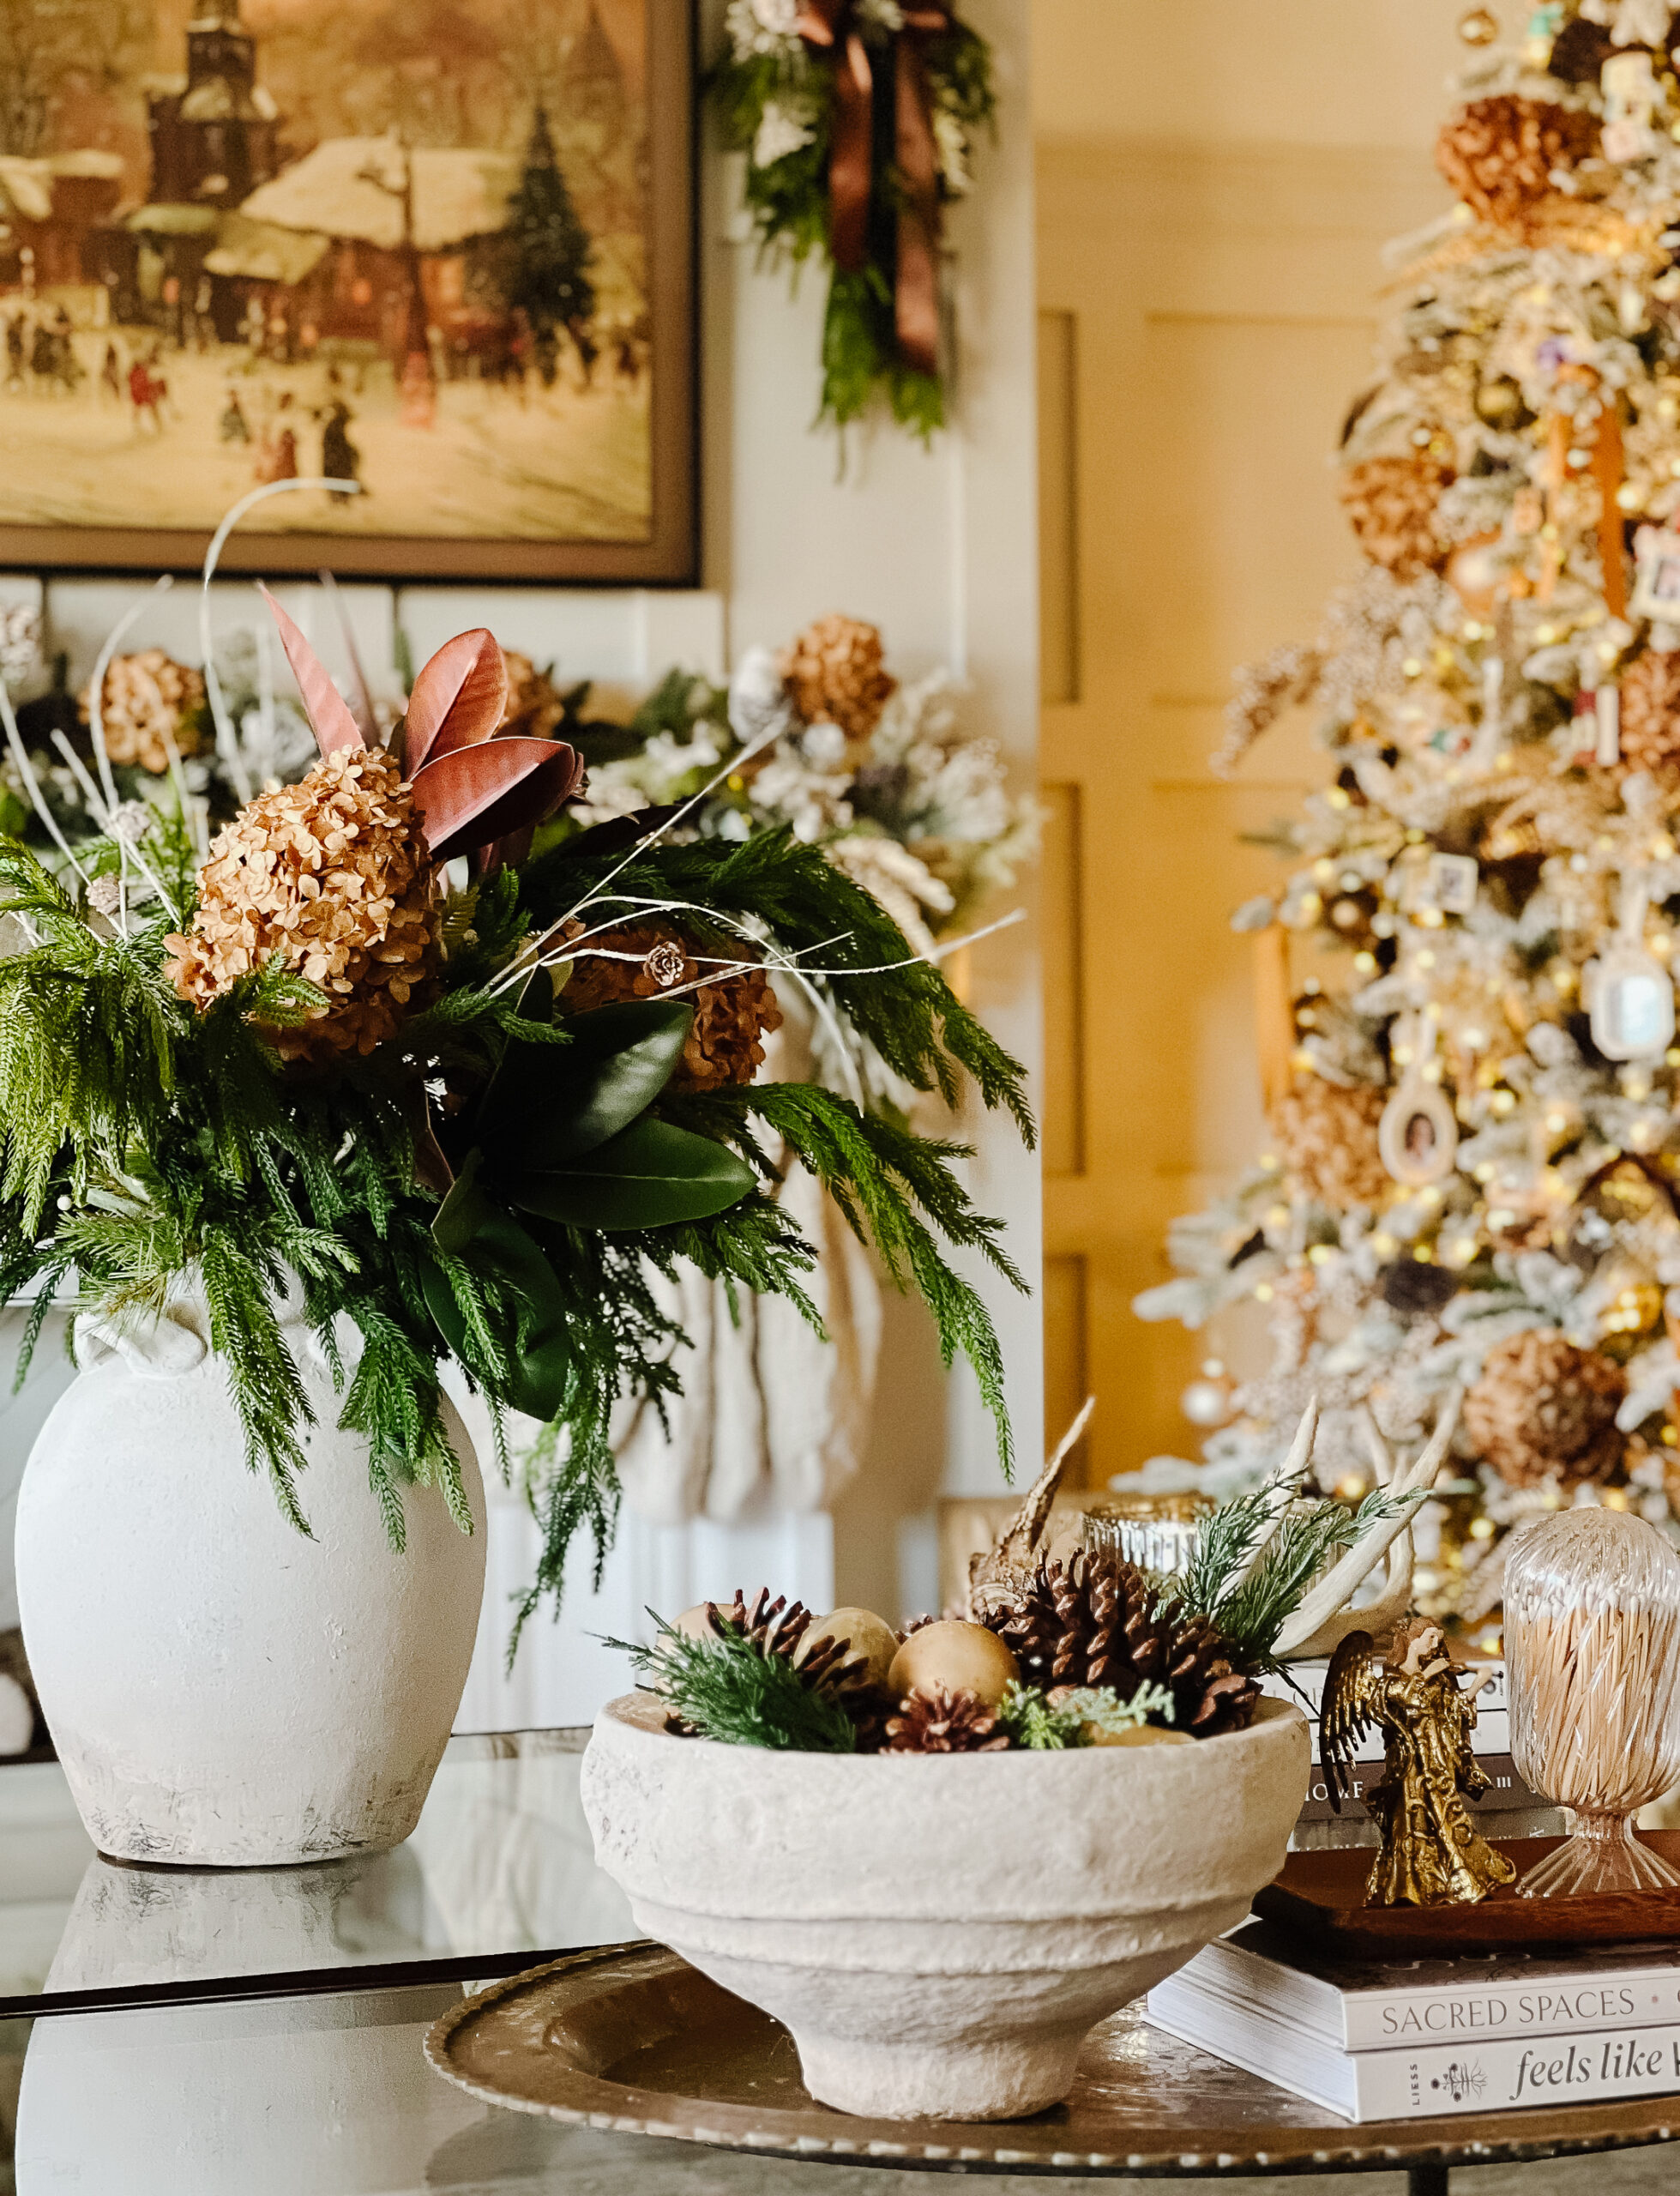 large vase with pine stems and dried hydrangeas, bowl with pinecones and ornaments